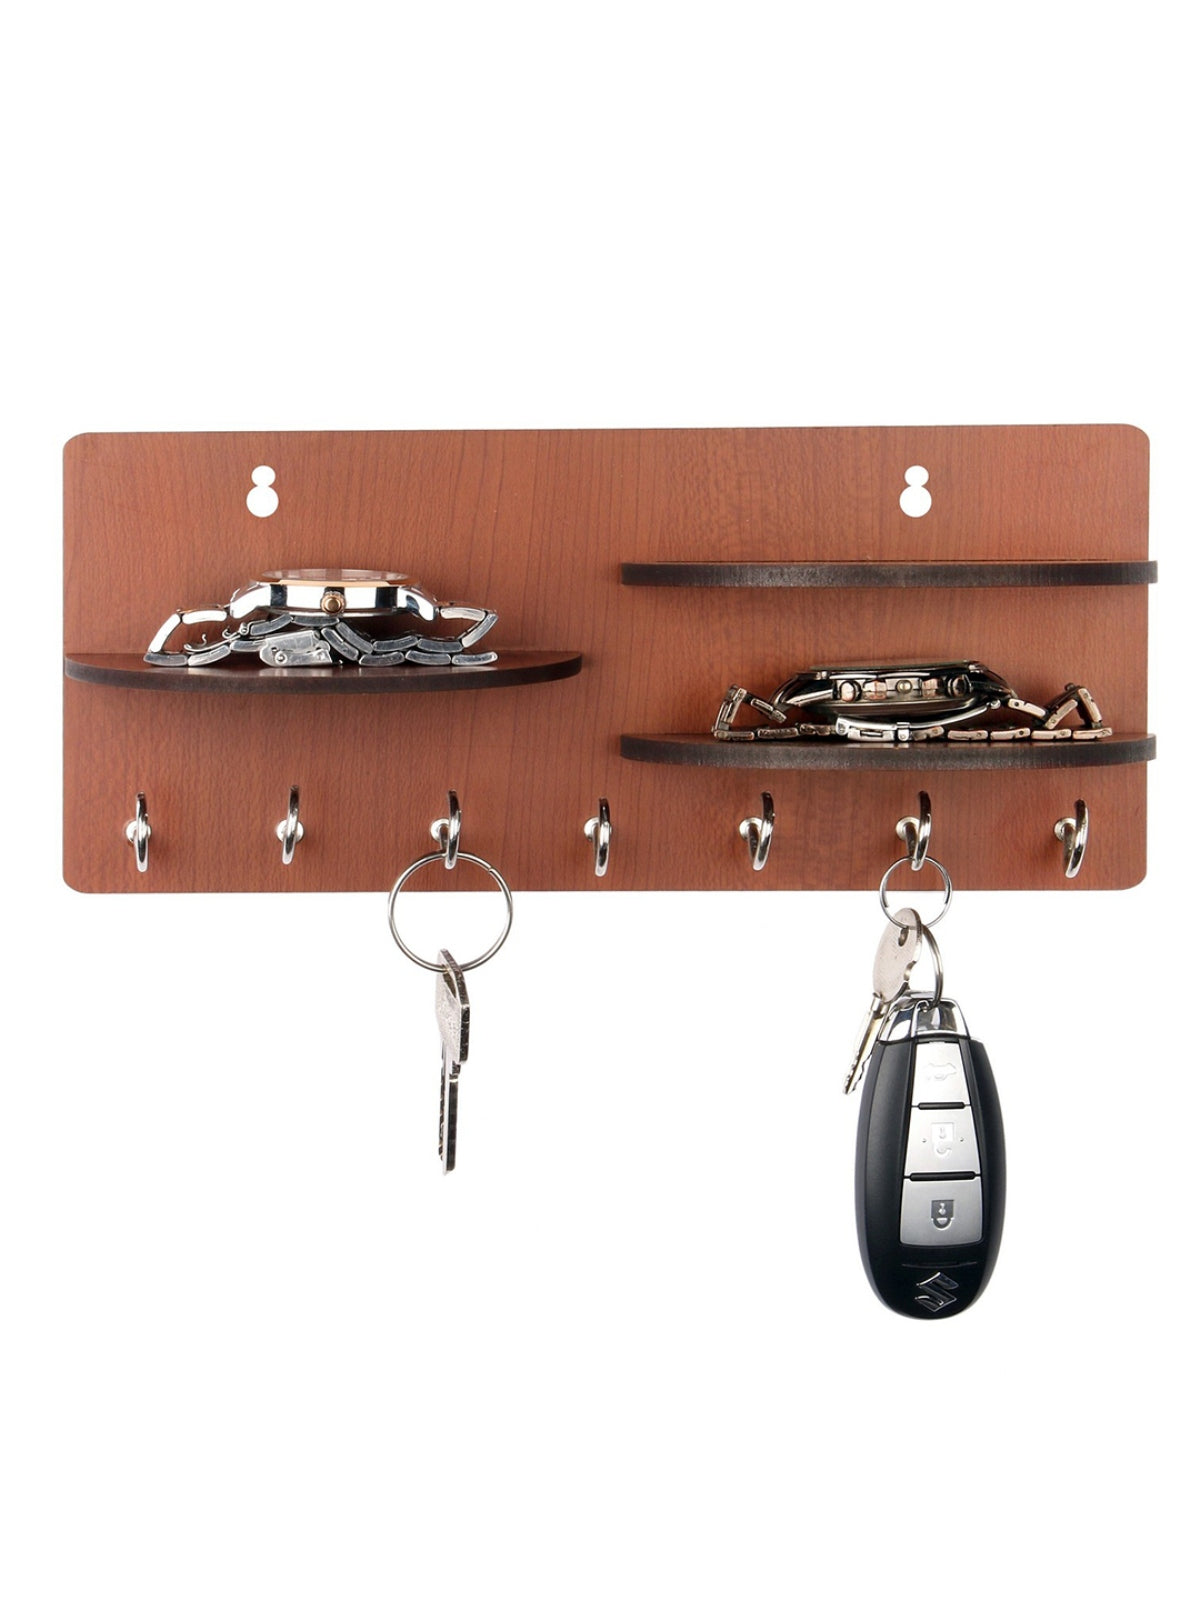 Wooden Key Holder With 3 Round Shelf For Home & Office Wall Decorative